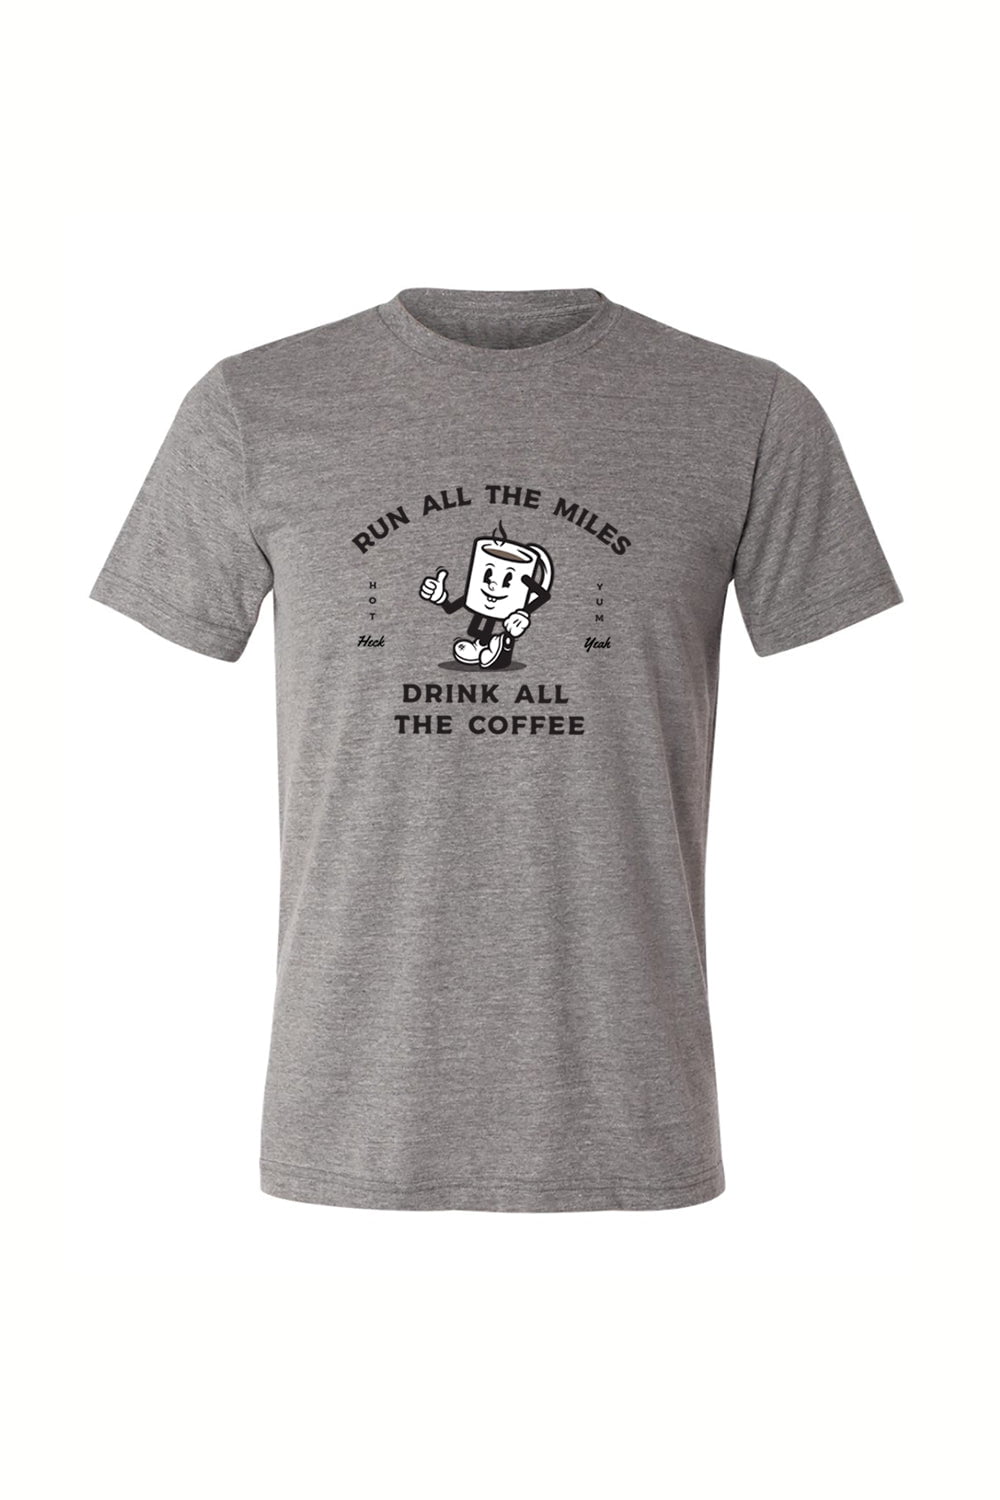 Sarah Marie Design Studio Run All The Miles, Drink All The Coffee T-Shirt